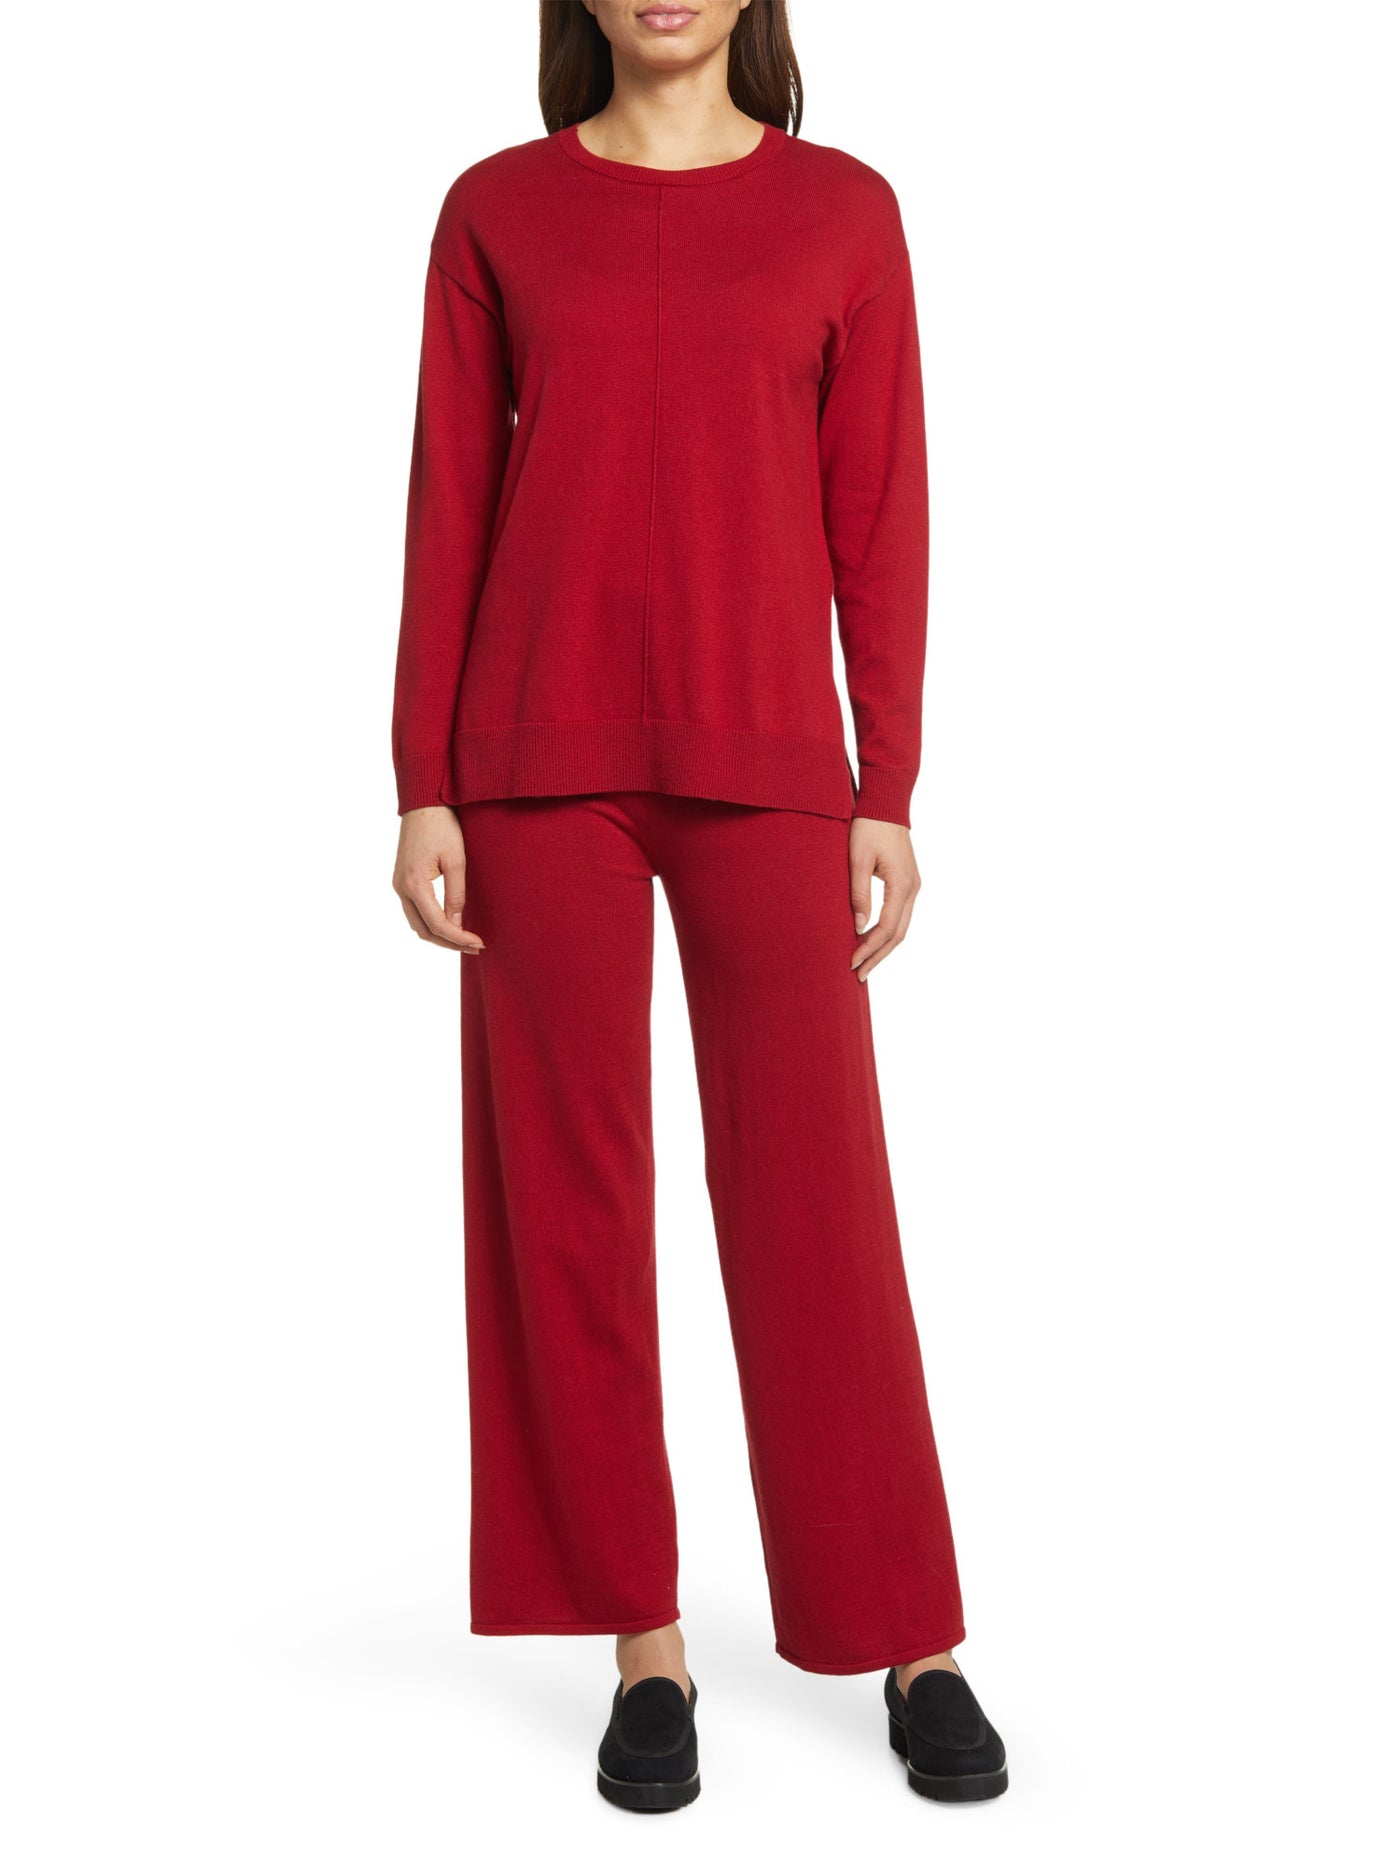 ANNE KLEIN Womens Red Long Sleeve Crew Neck Sweater L